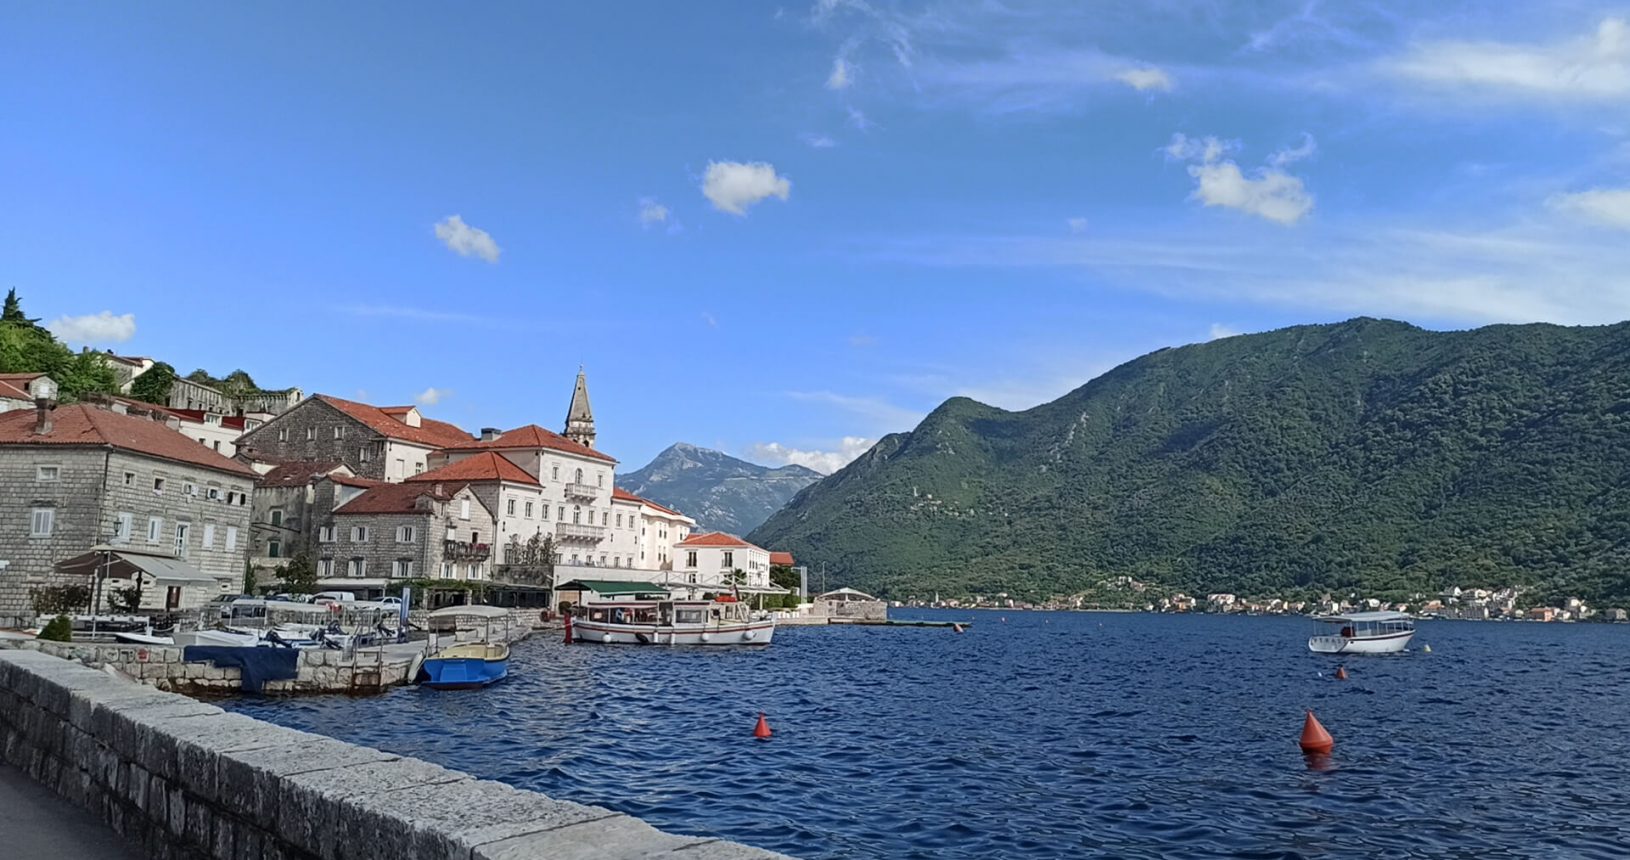 The view to Perast adventure